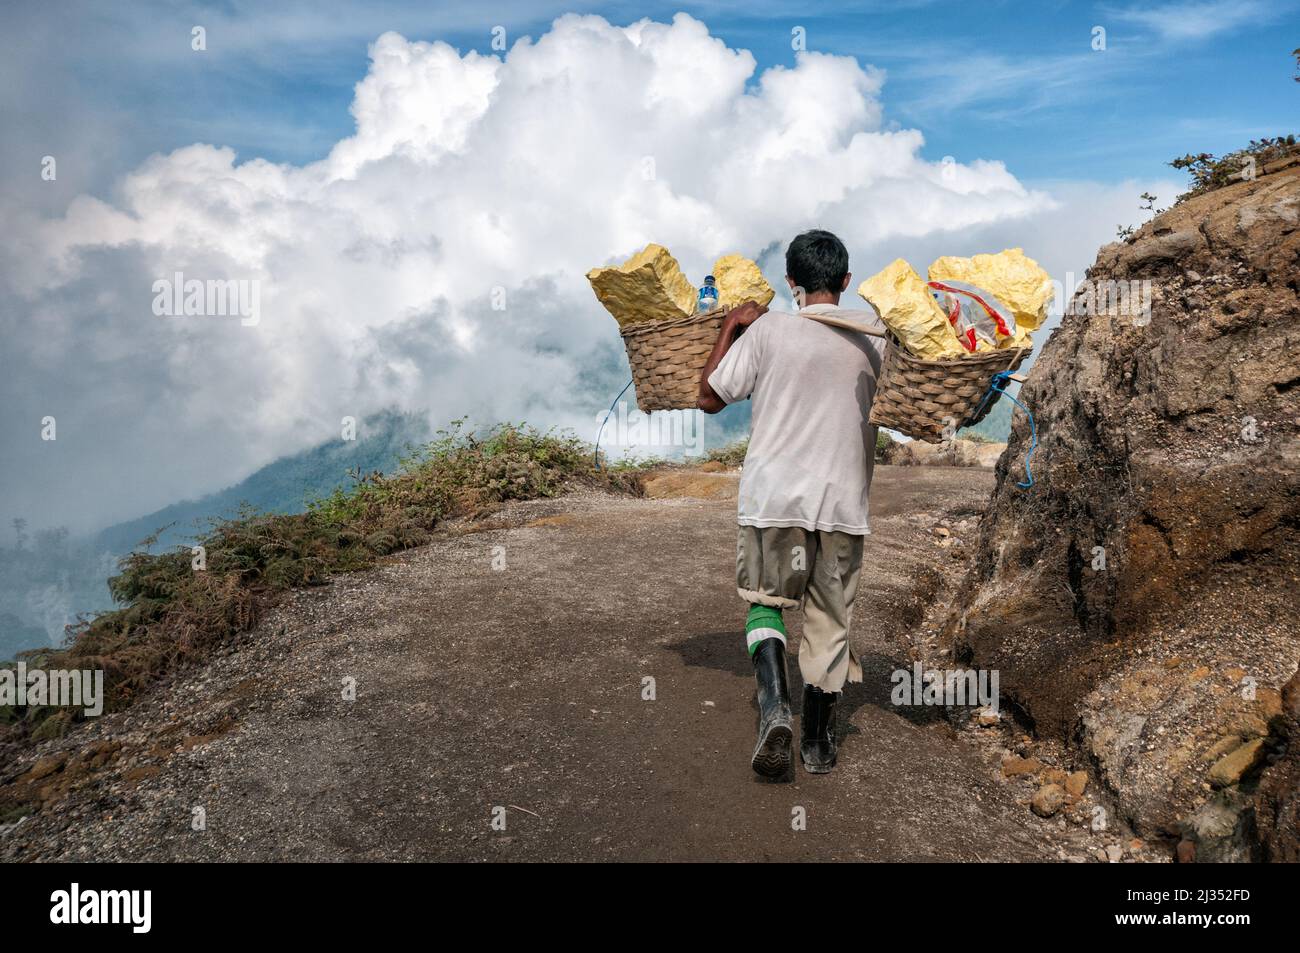 Porter carrying sulfur on a trail of Ijen volcano, Java Island, Indonesia Stock Photo